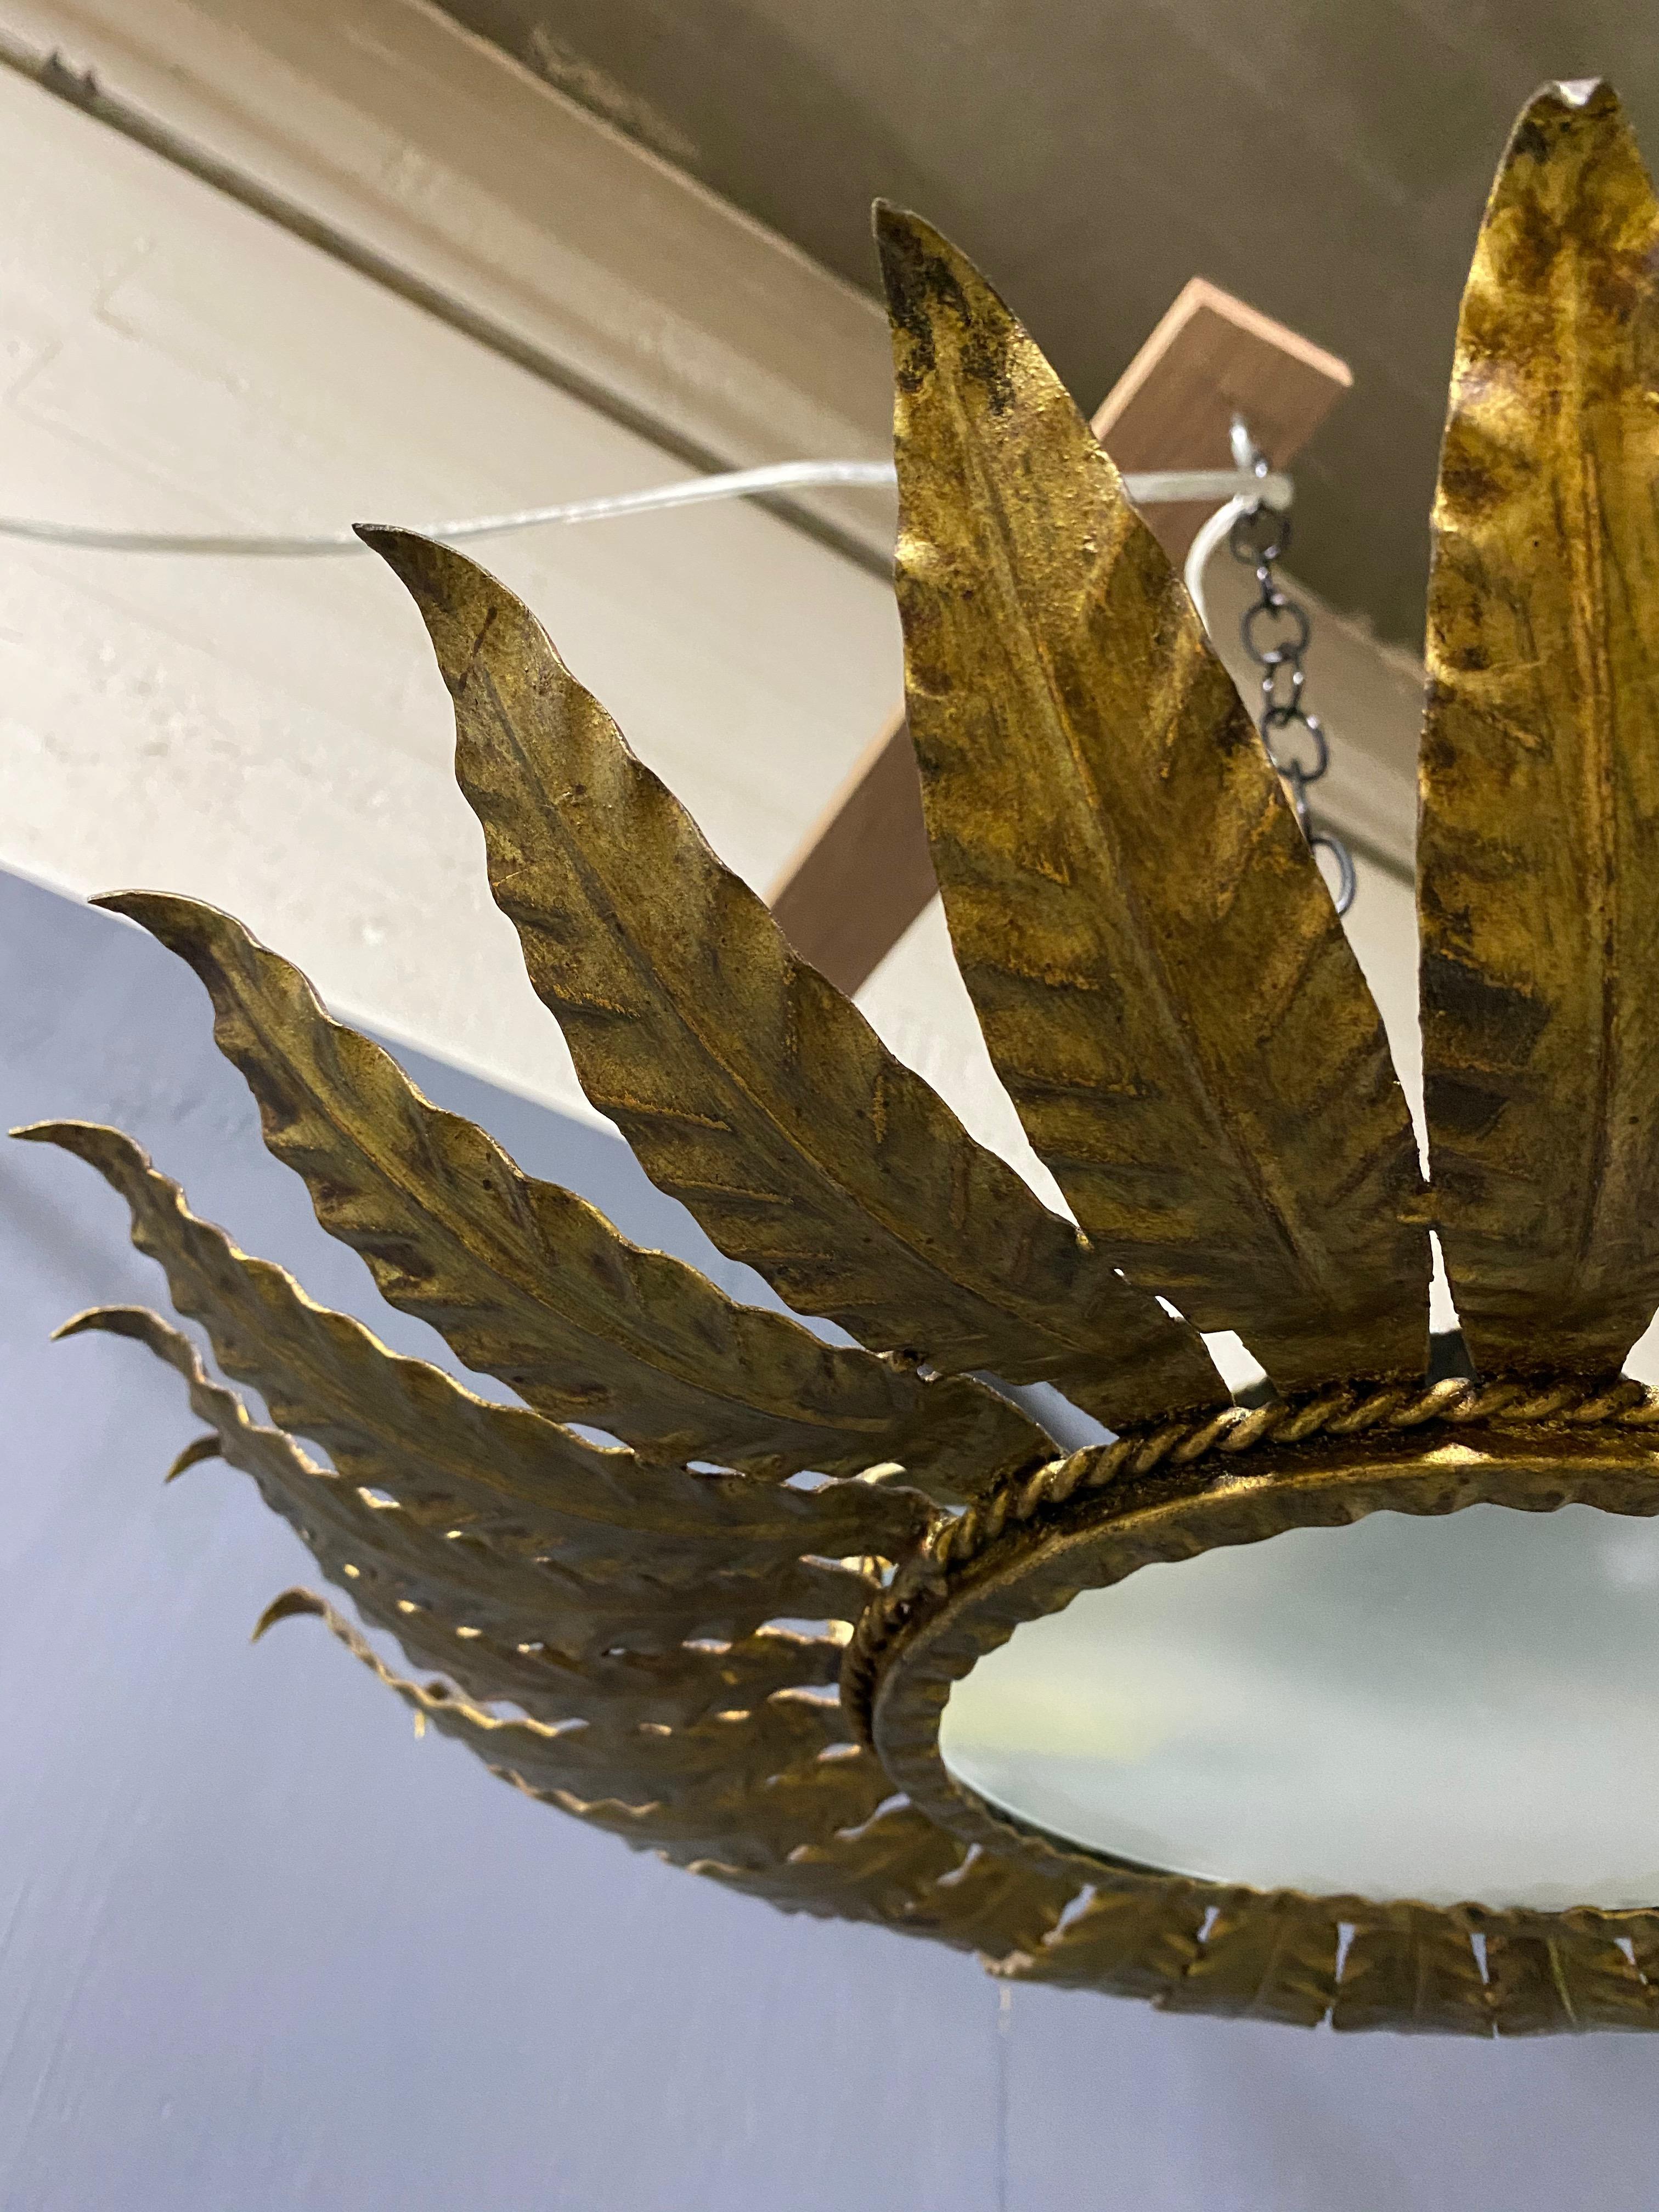 Mid-20th Century Spanish Gilt Metal Ceiling Fixture with Radiating Leaves